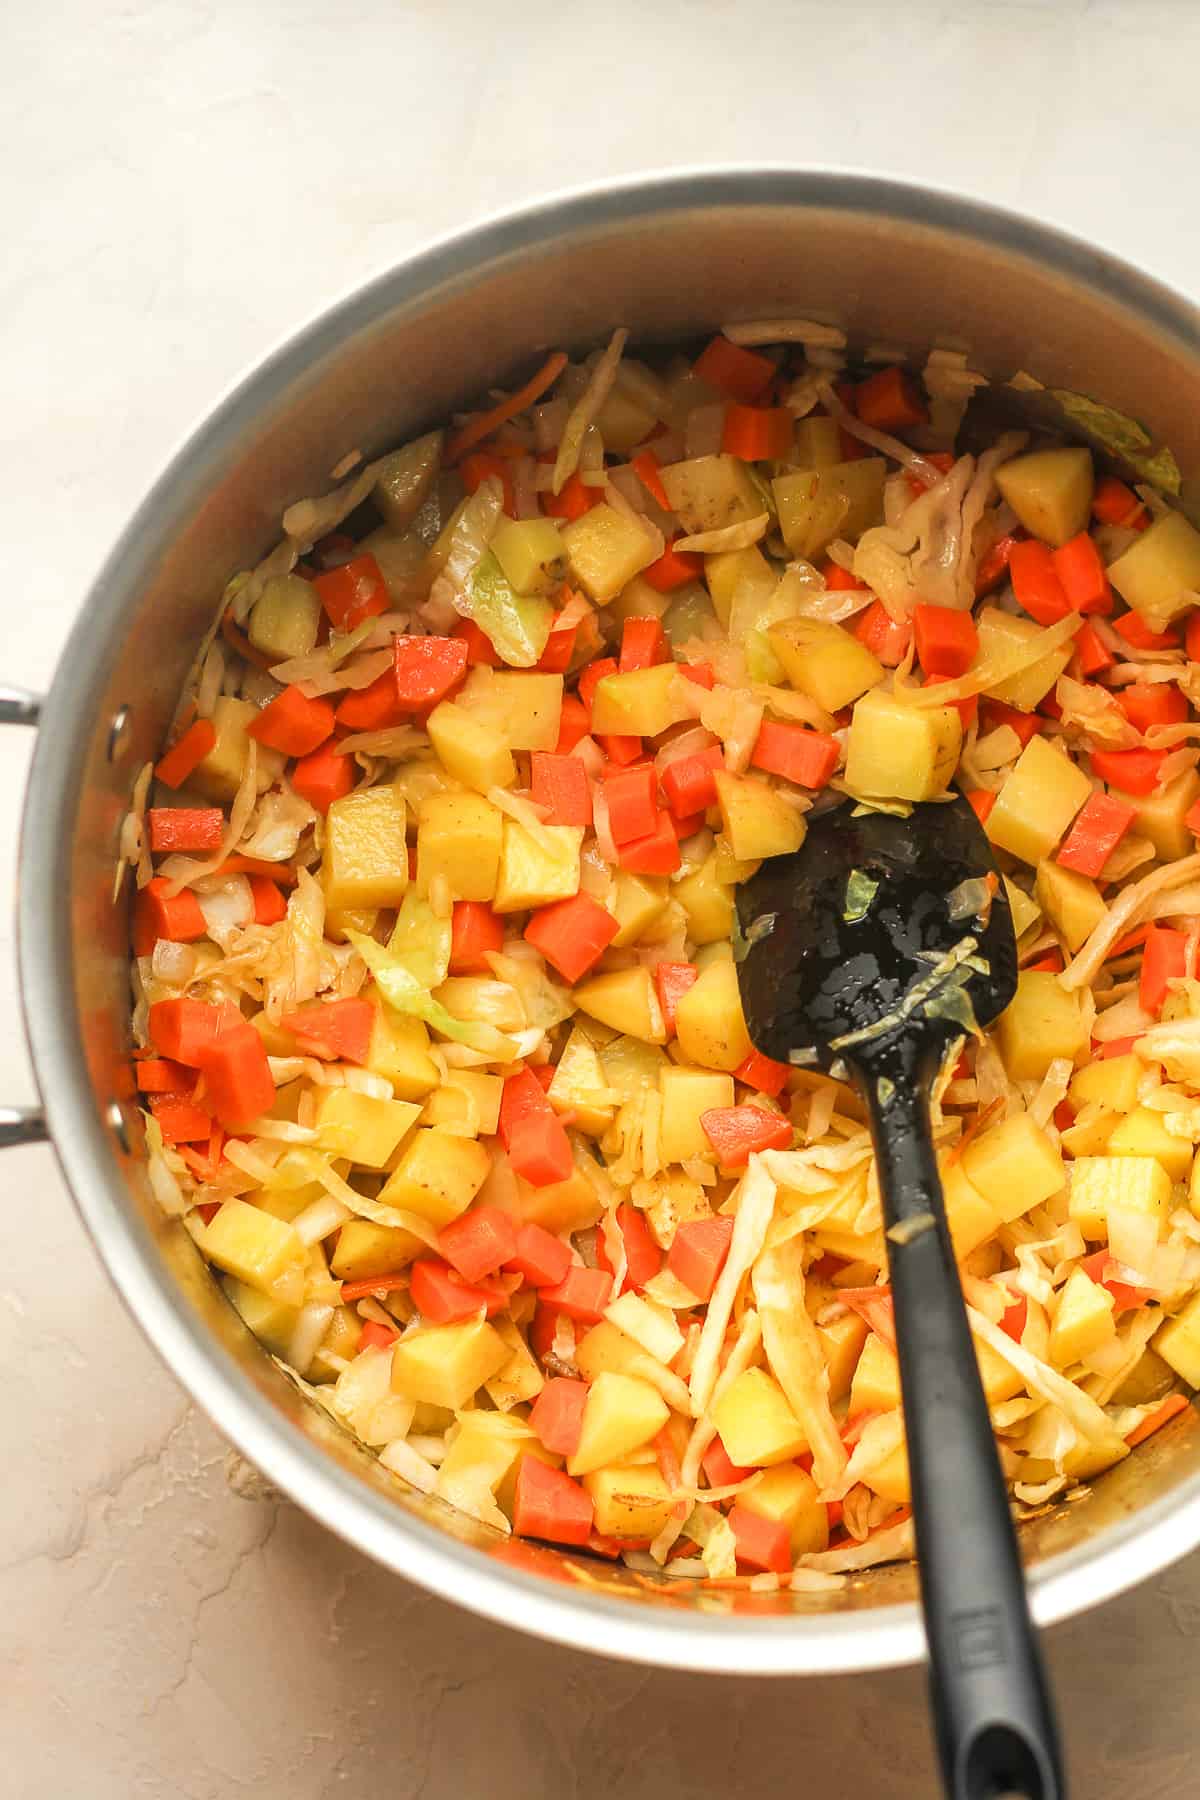 A large pot of sautéed onions, carrots, cabbage, and potatoes.